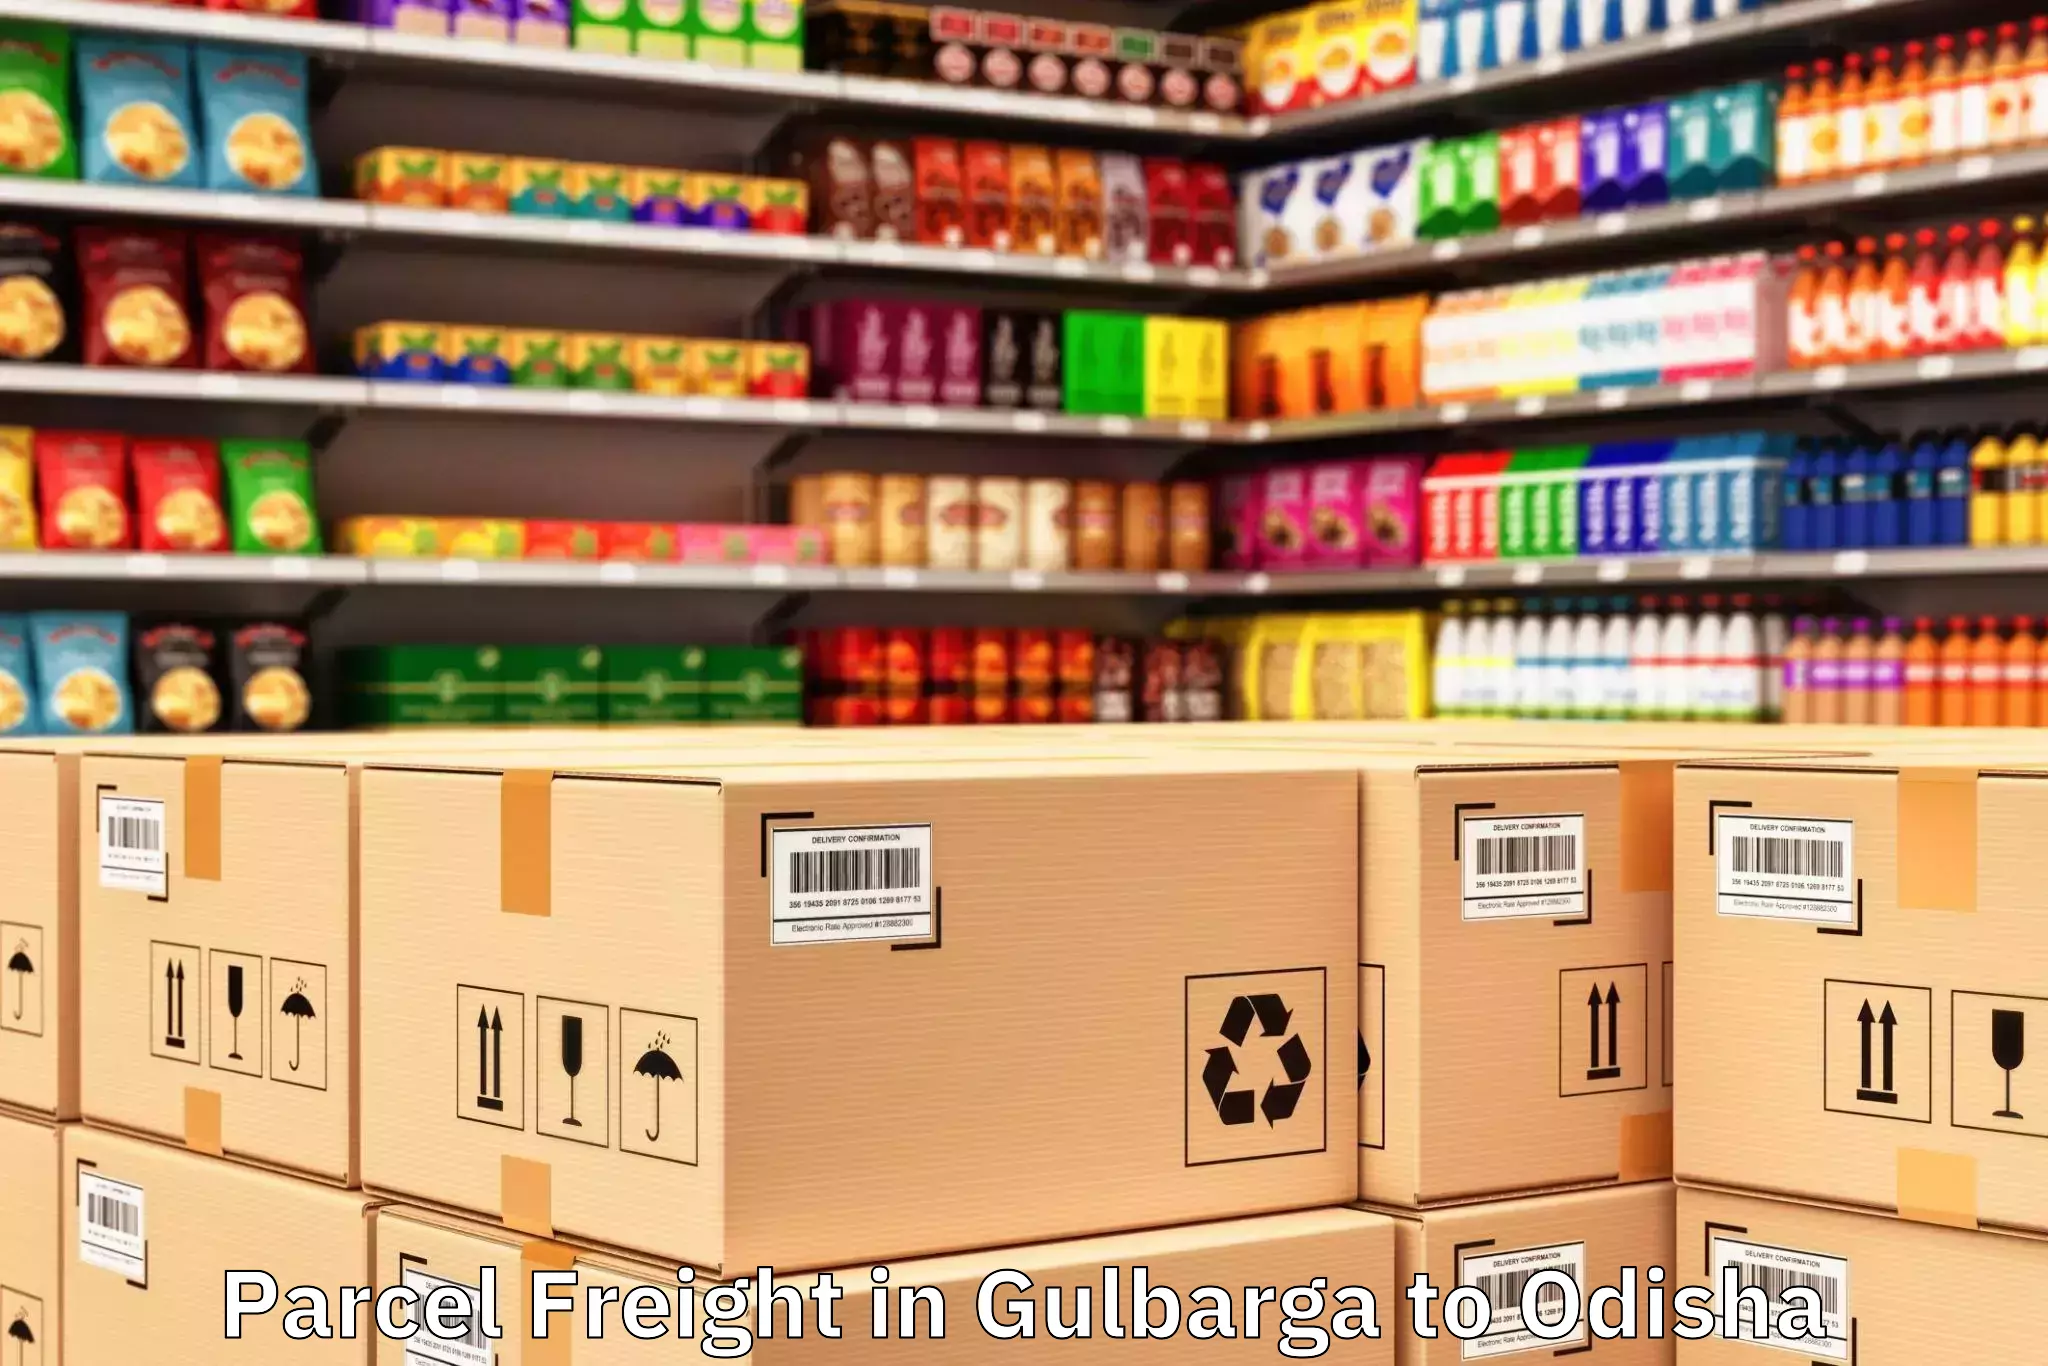 Top Gulbarga to Baidyeswar Parcel Freight Available